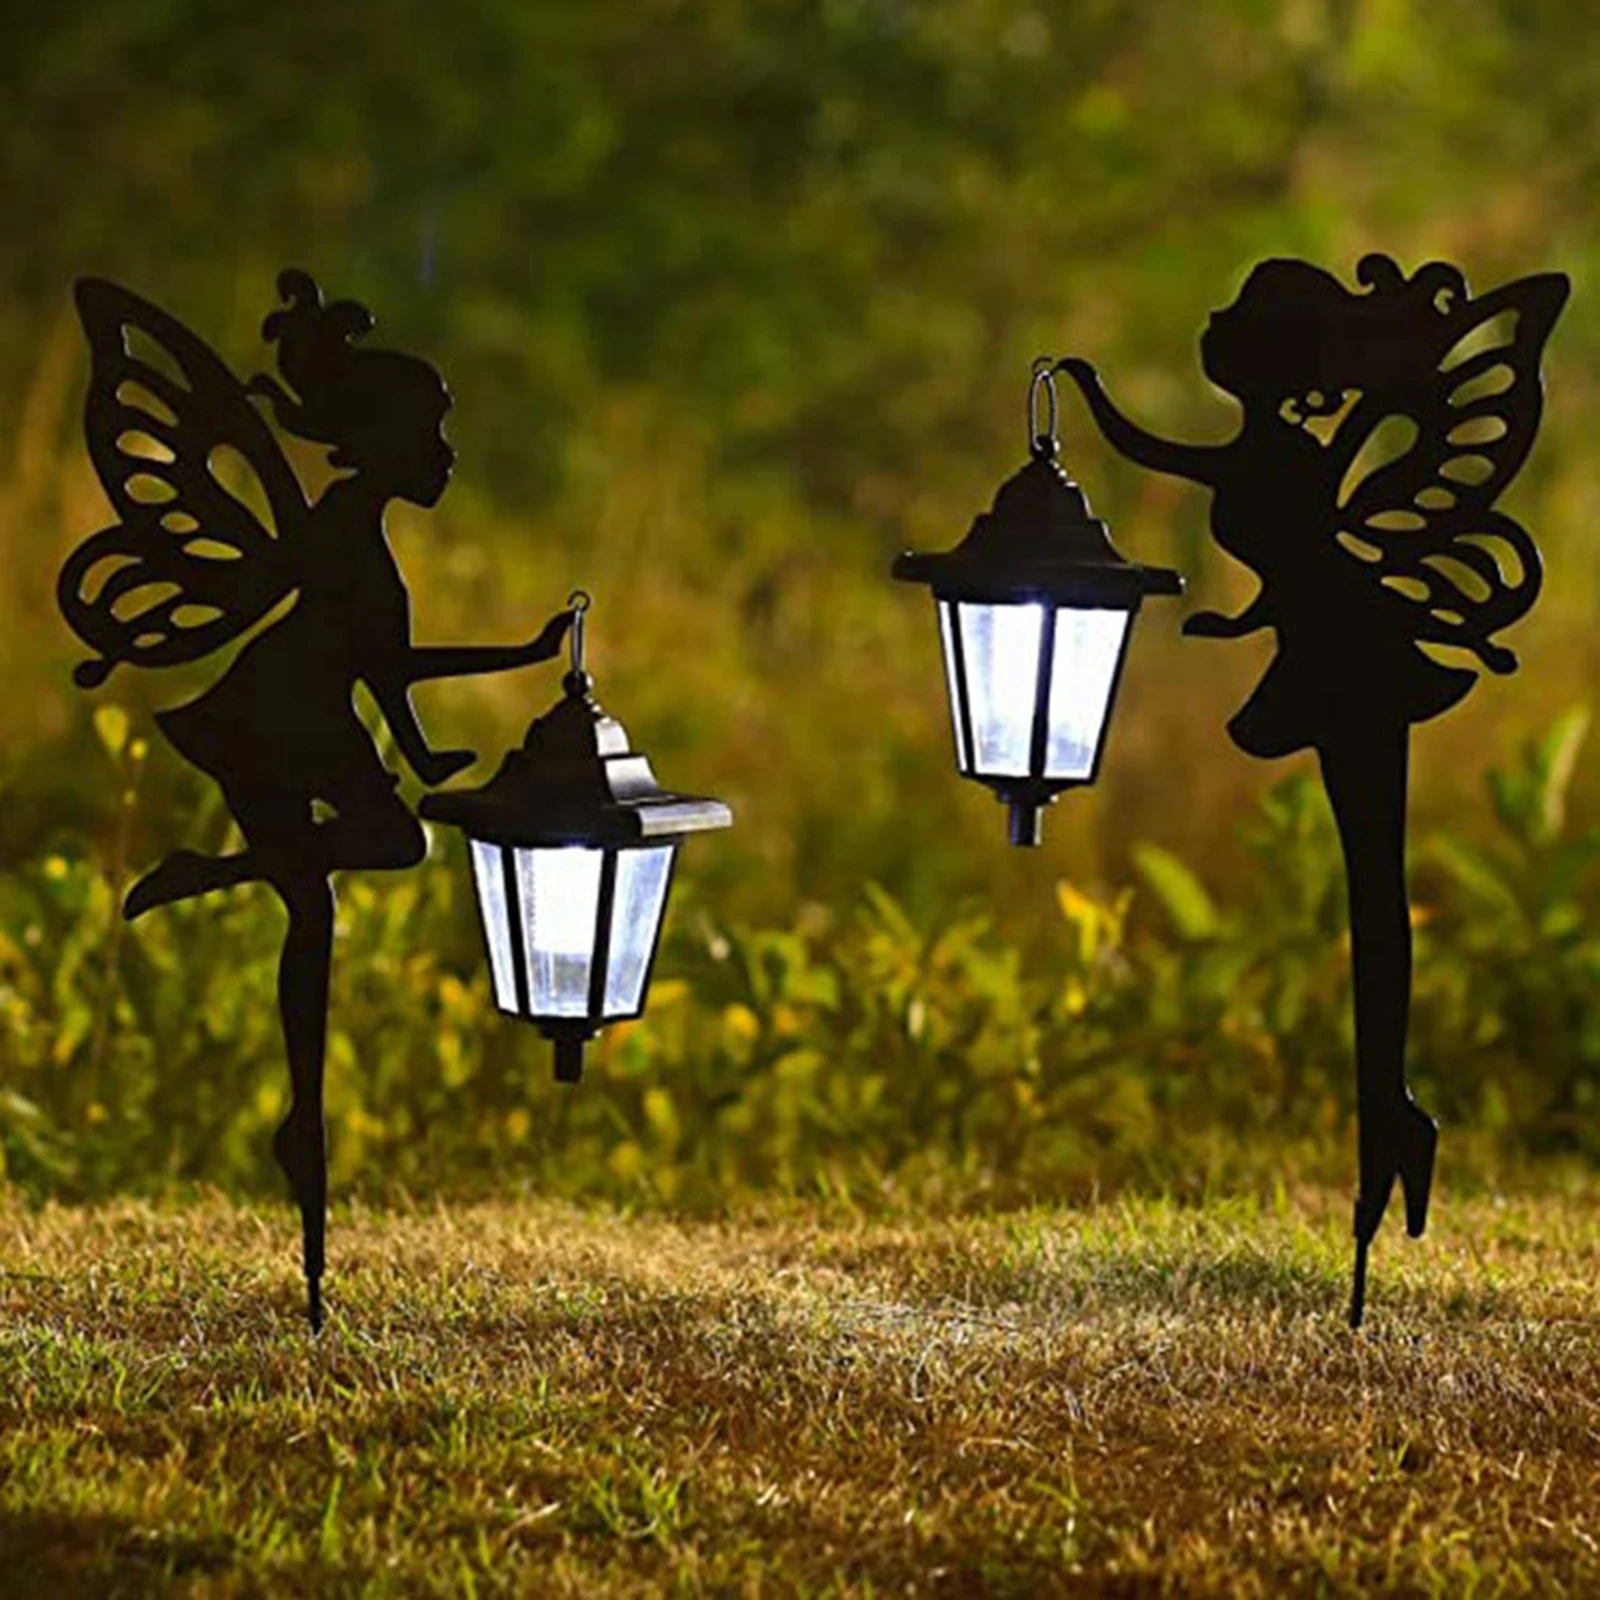 

Metal Fairy Silhouette Figure Sculpture Ornaments Home Outdoor Garden Statue Solar Figurines for Yard Lawn Patio Decorations